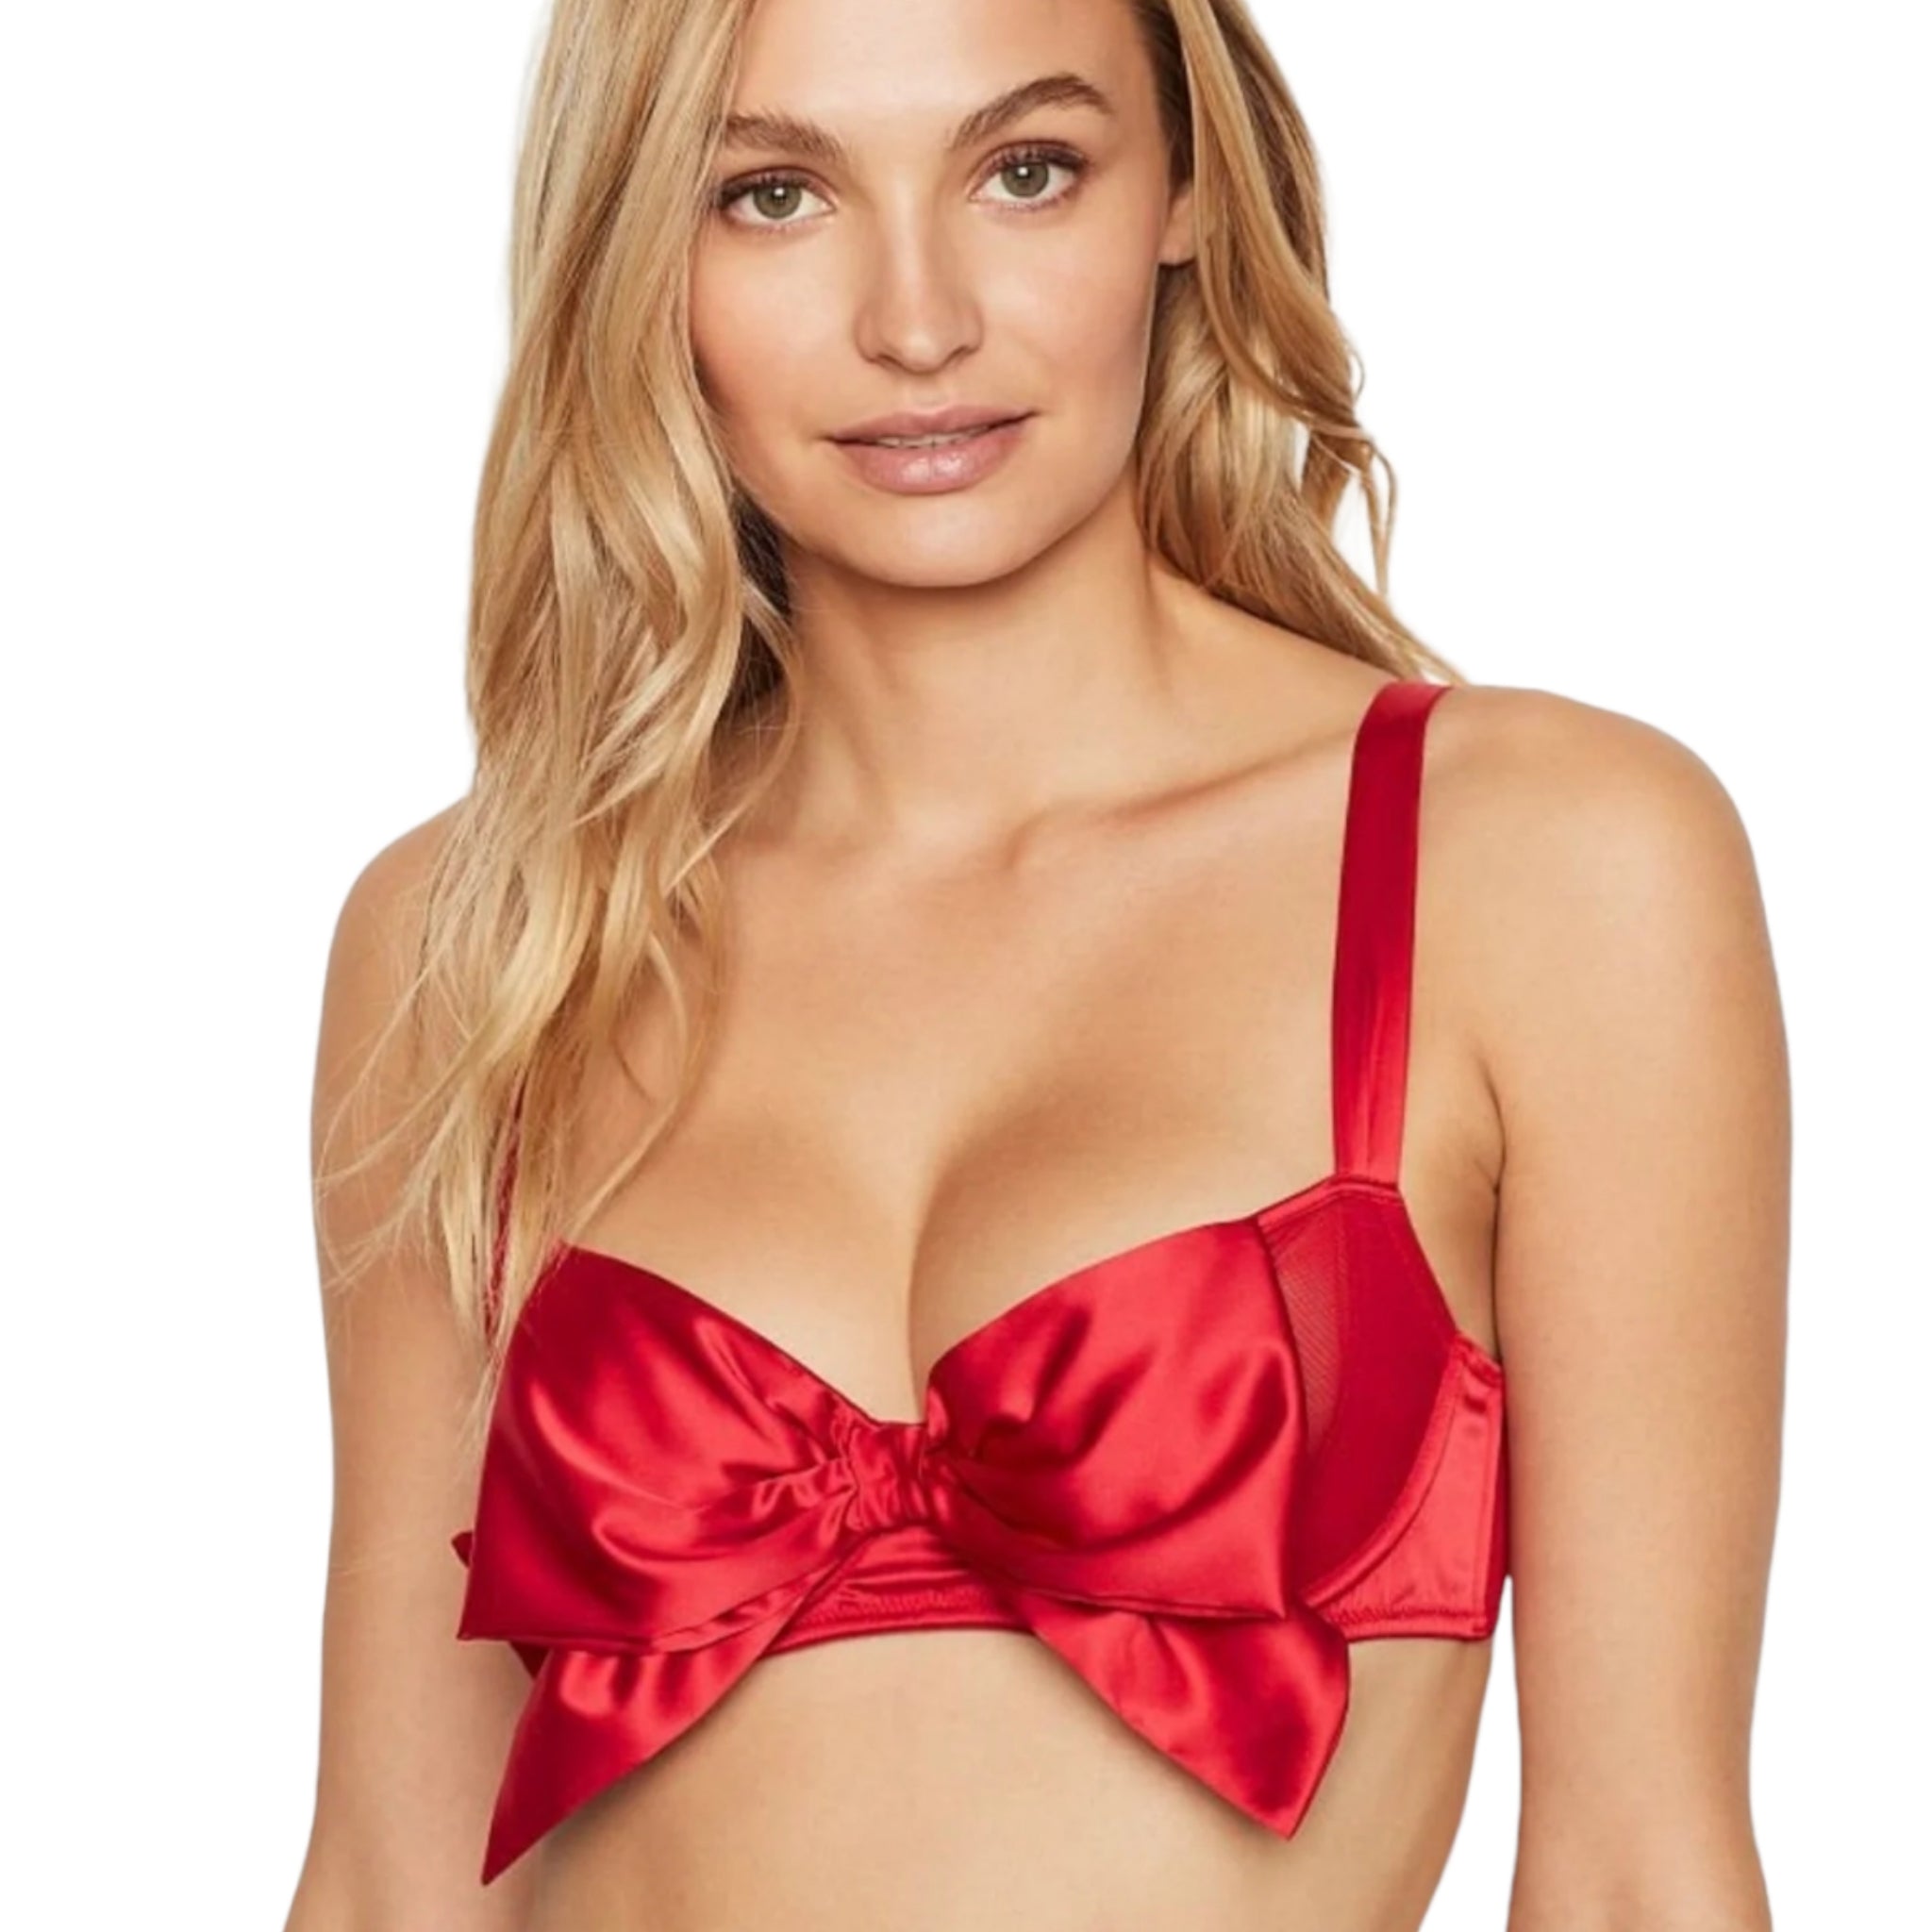 Victoria's Secret Victoria Secret 36B DREAM ANGELS Burgundy Padded Push Up  Bra Red Size undefined - $23 - From Timothy